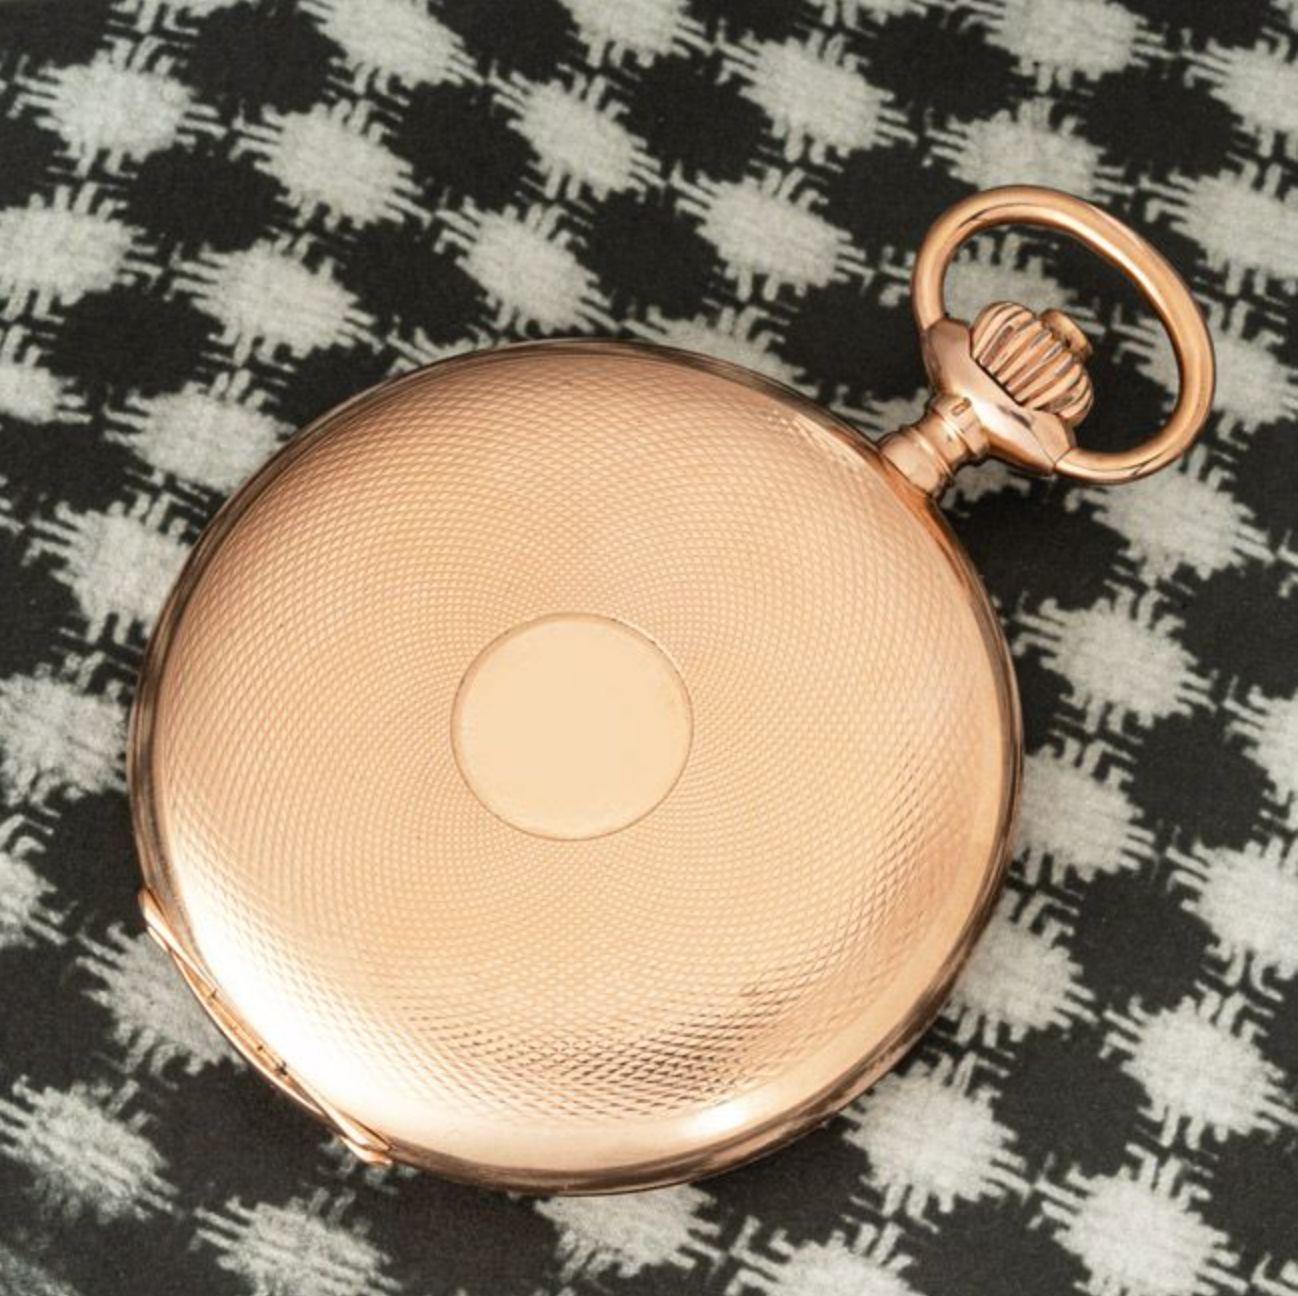 IWC Rose Gold Full Hunter Keyless Lever Pocket Watch C1900s For Sale 2